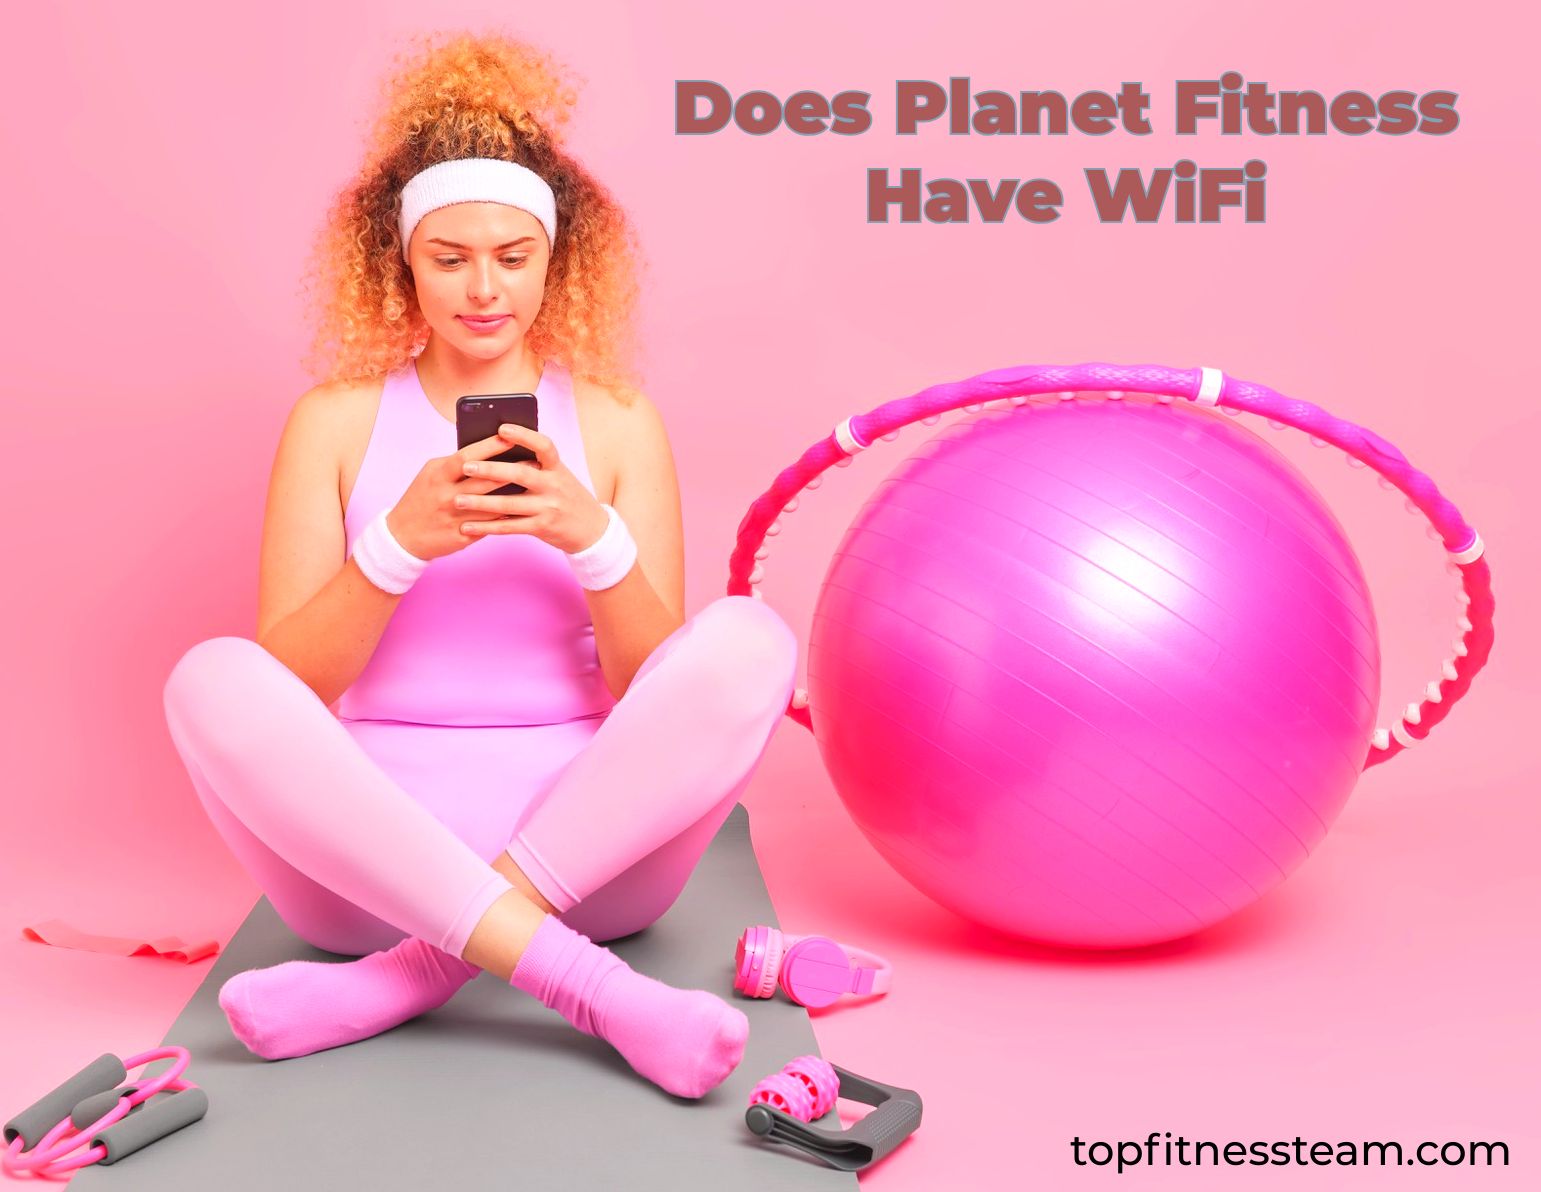 Does Planet Fitness Have WiFi?